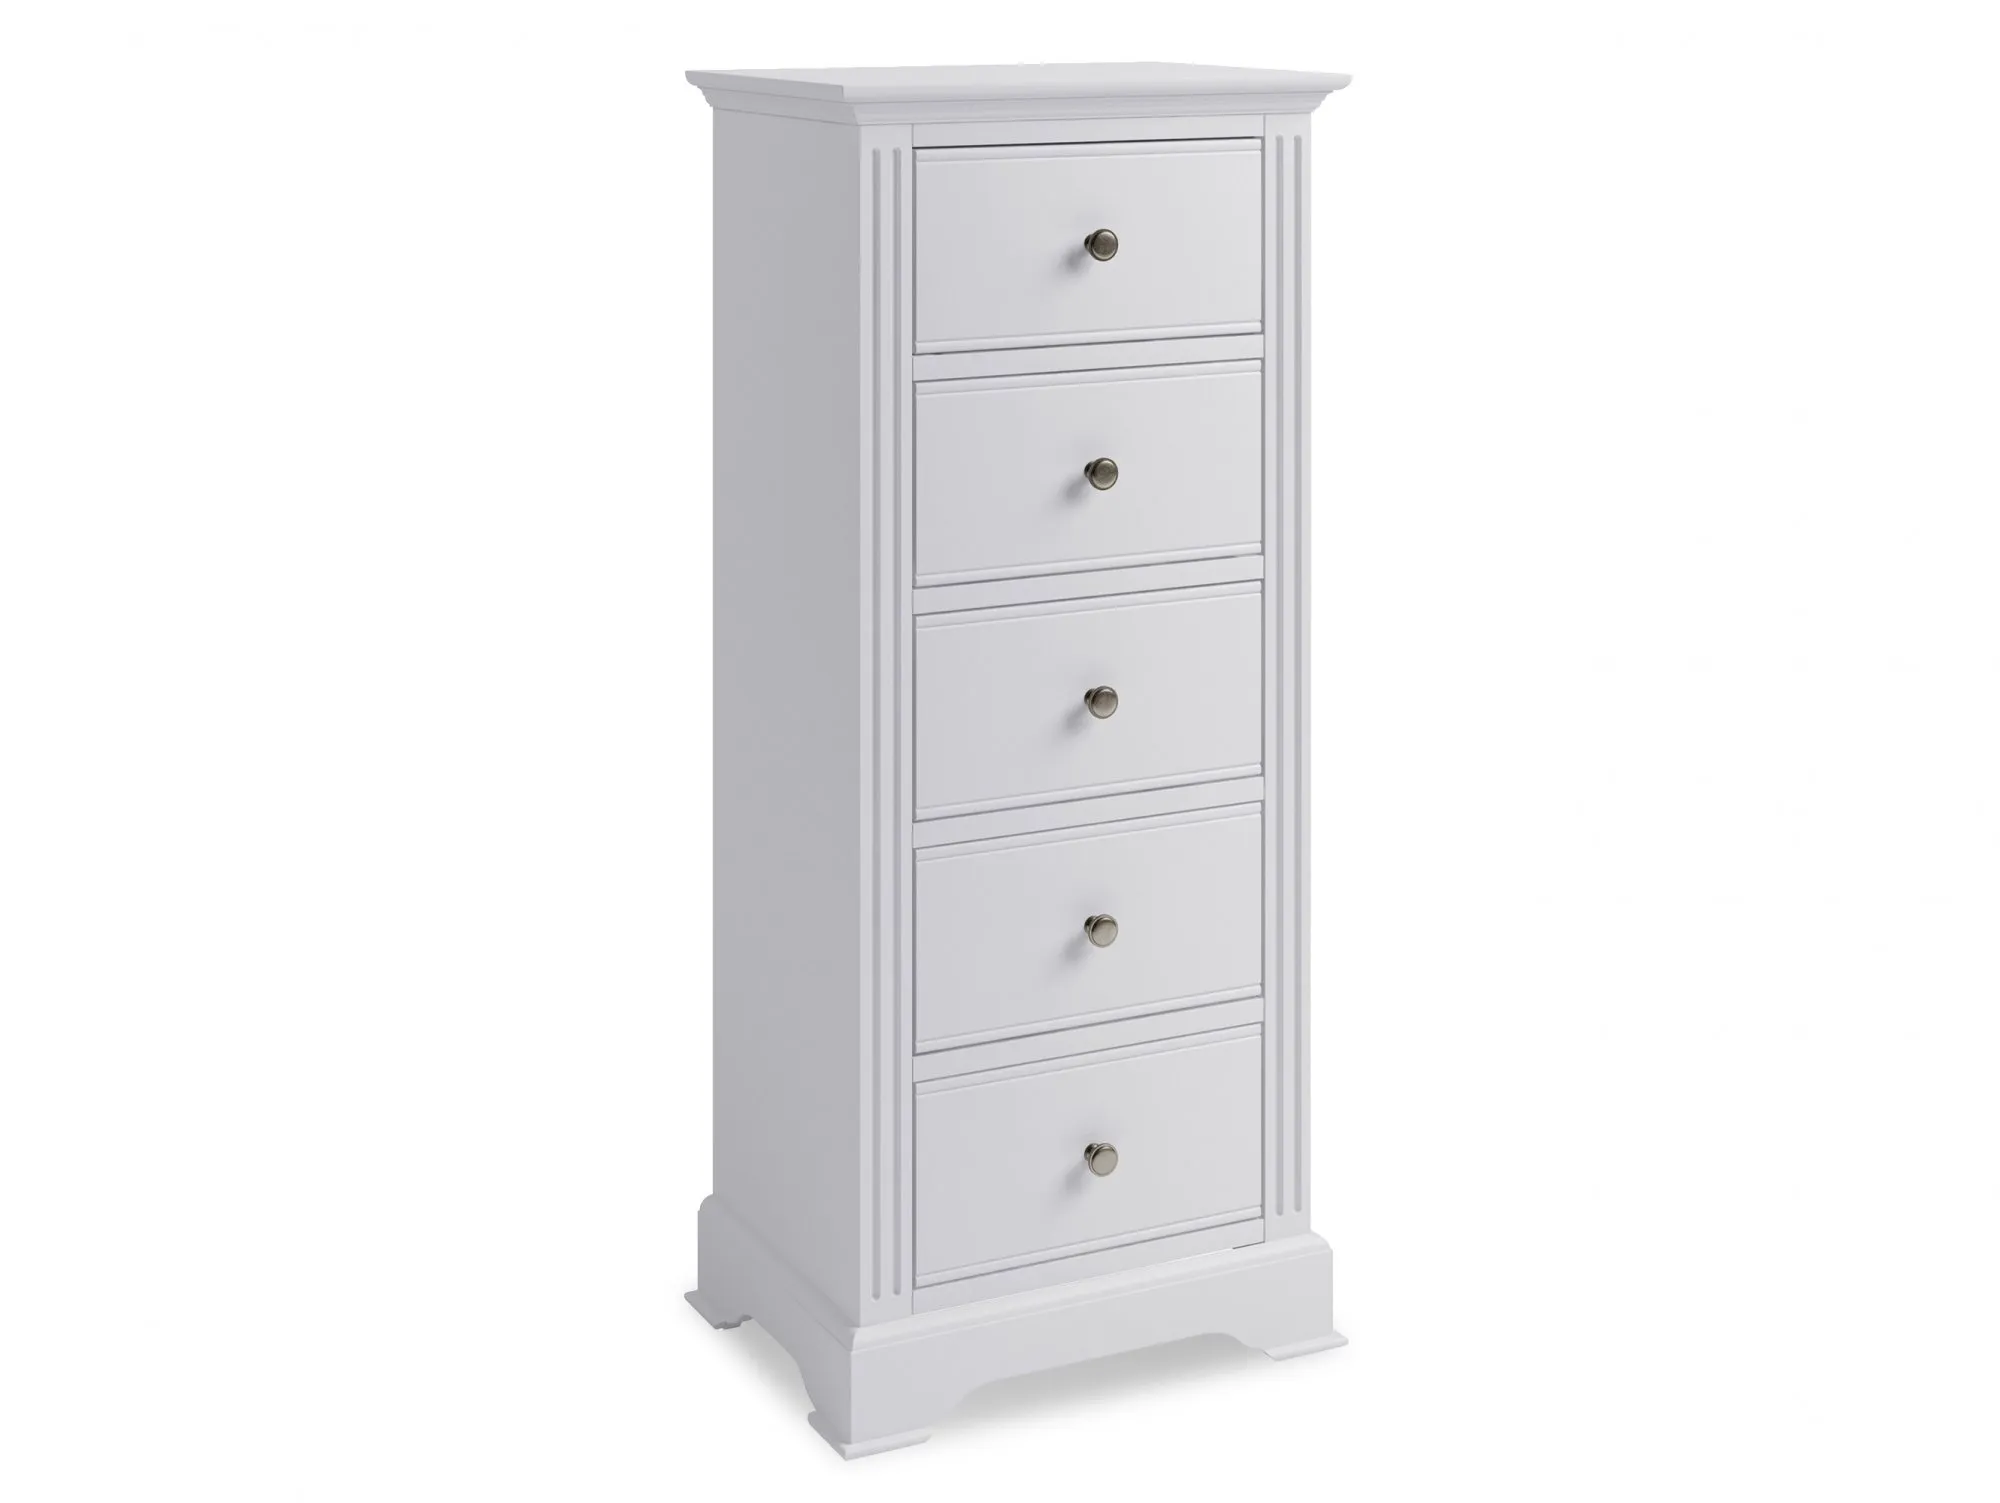 Kenmore Kenmore Catlyn White 5 Drawer Tall Narrow Chest of Drawers (Assembled)